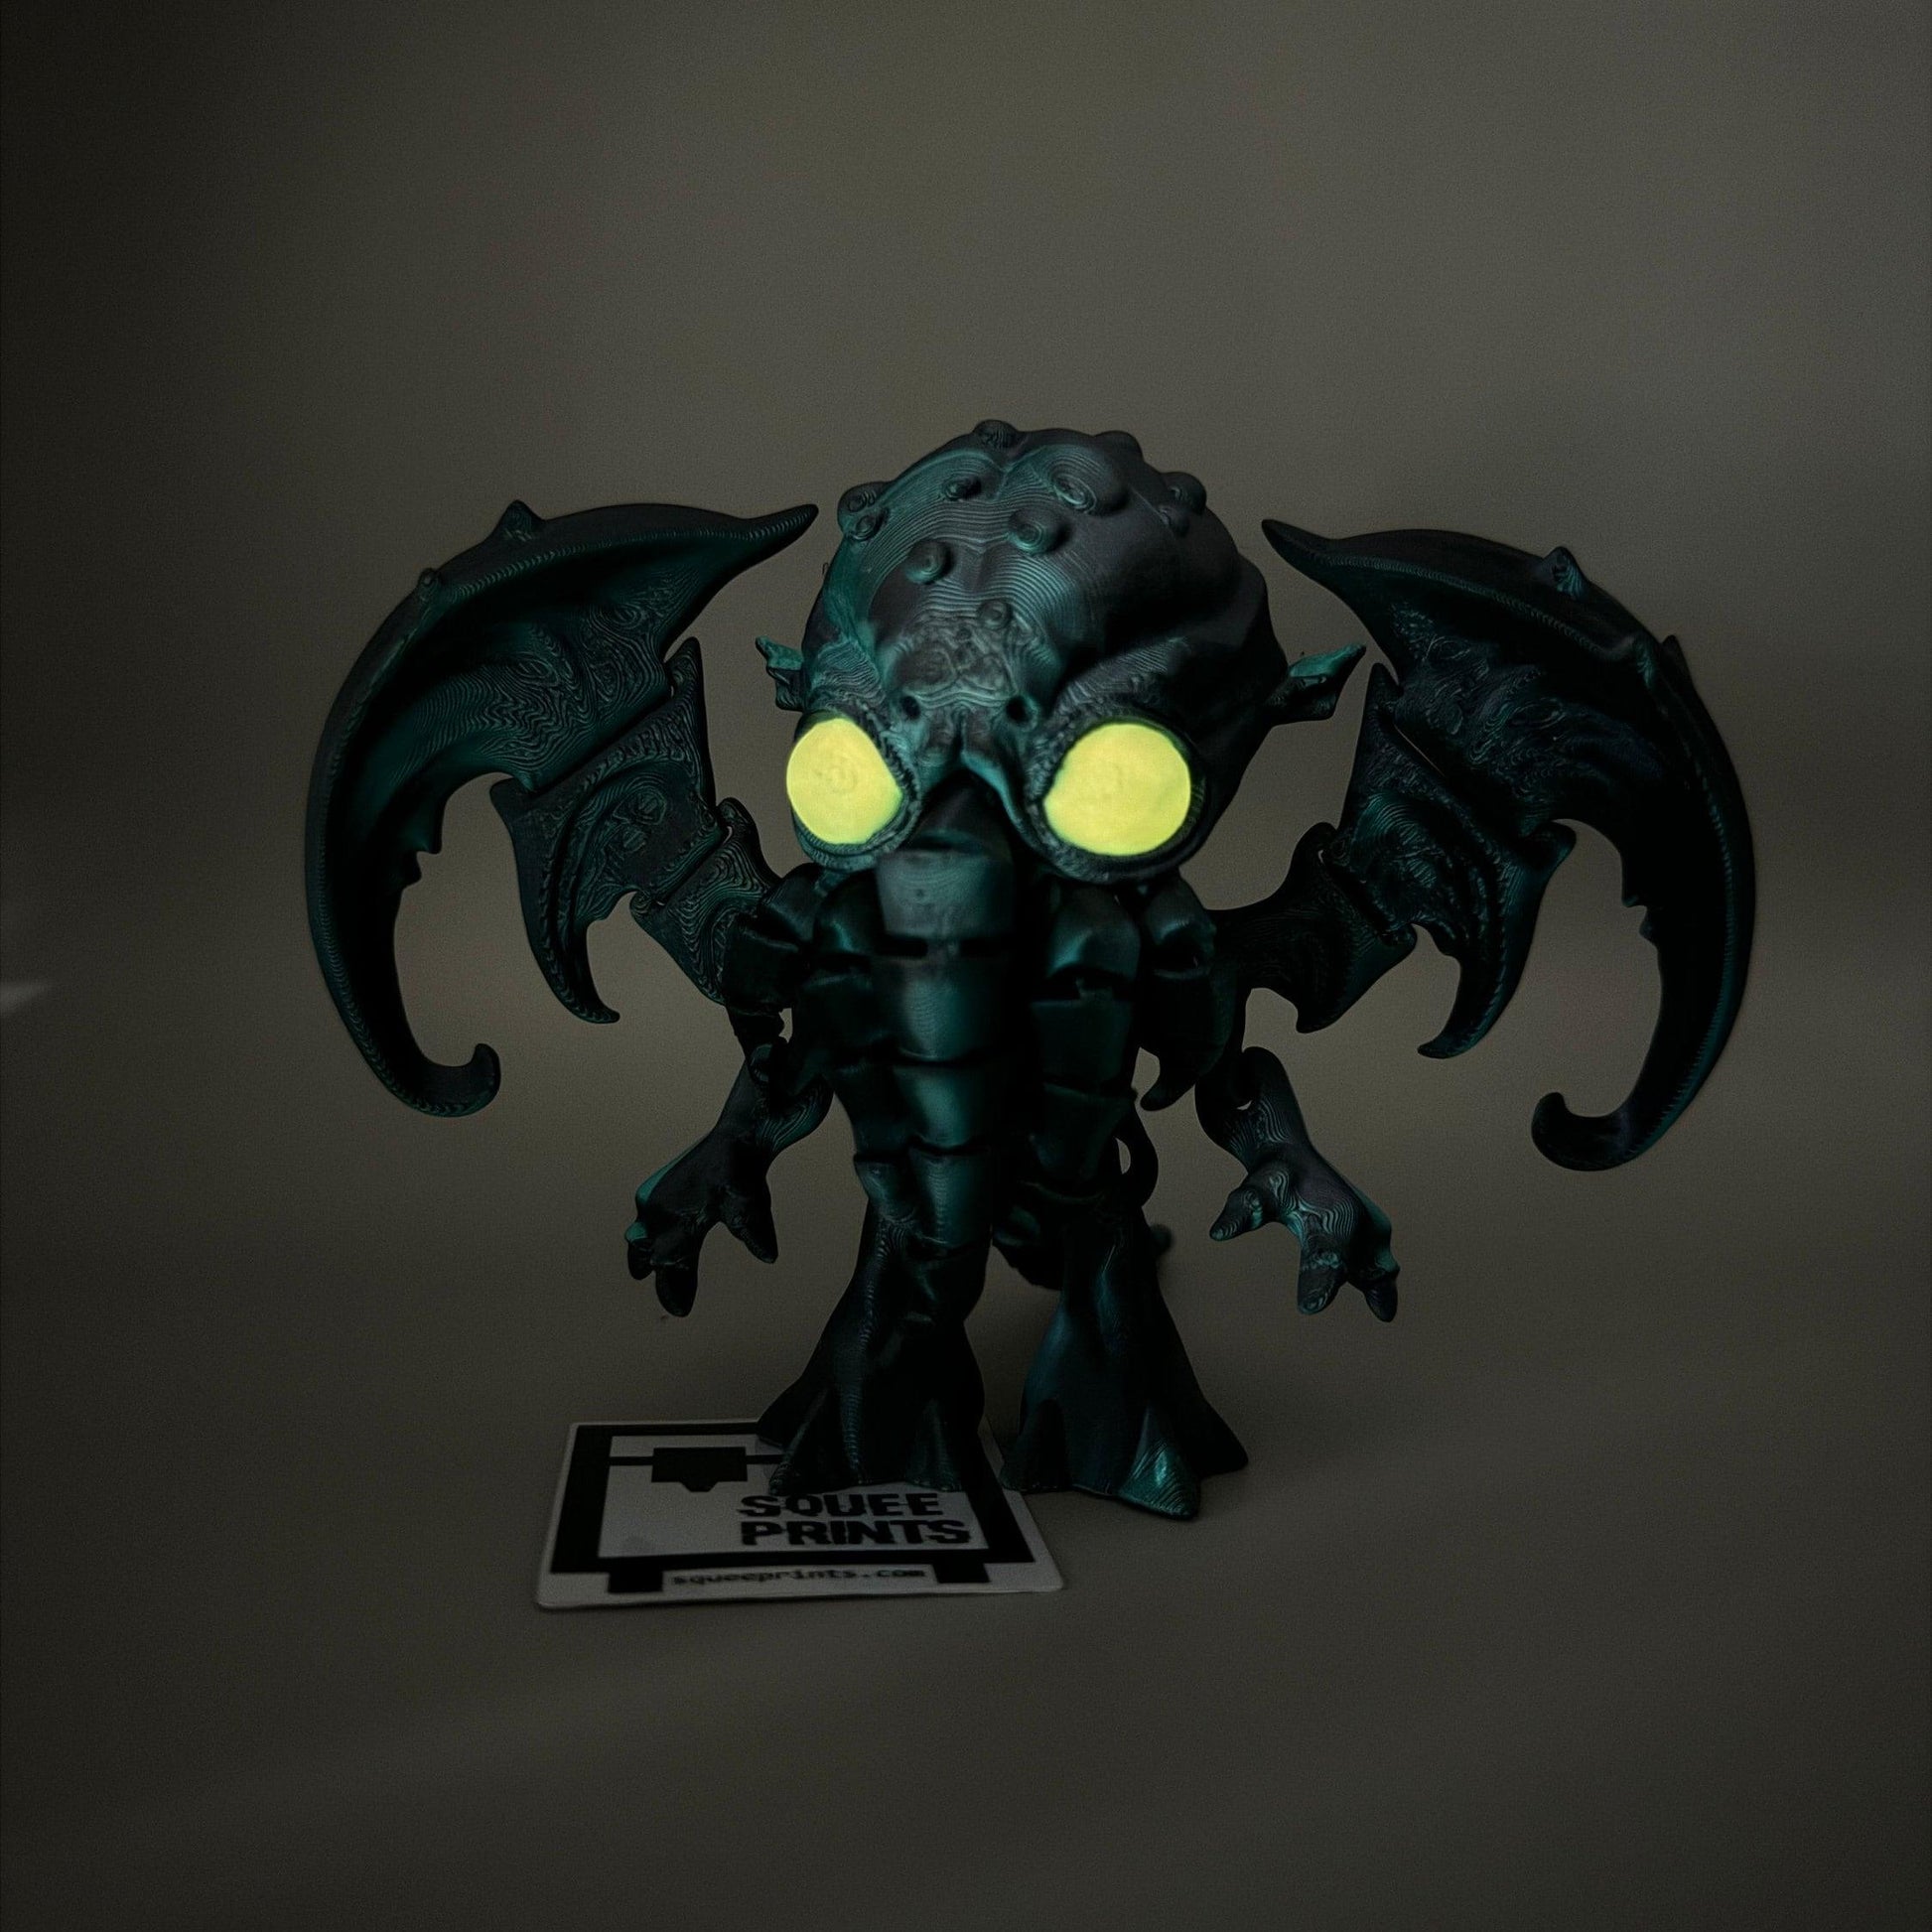 Cthulhu | Articulated | 3D Print | Fidget | Glow in the Dark - Squee Prints